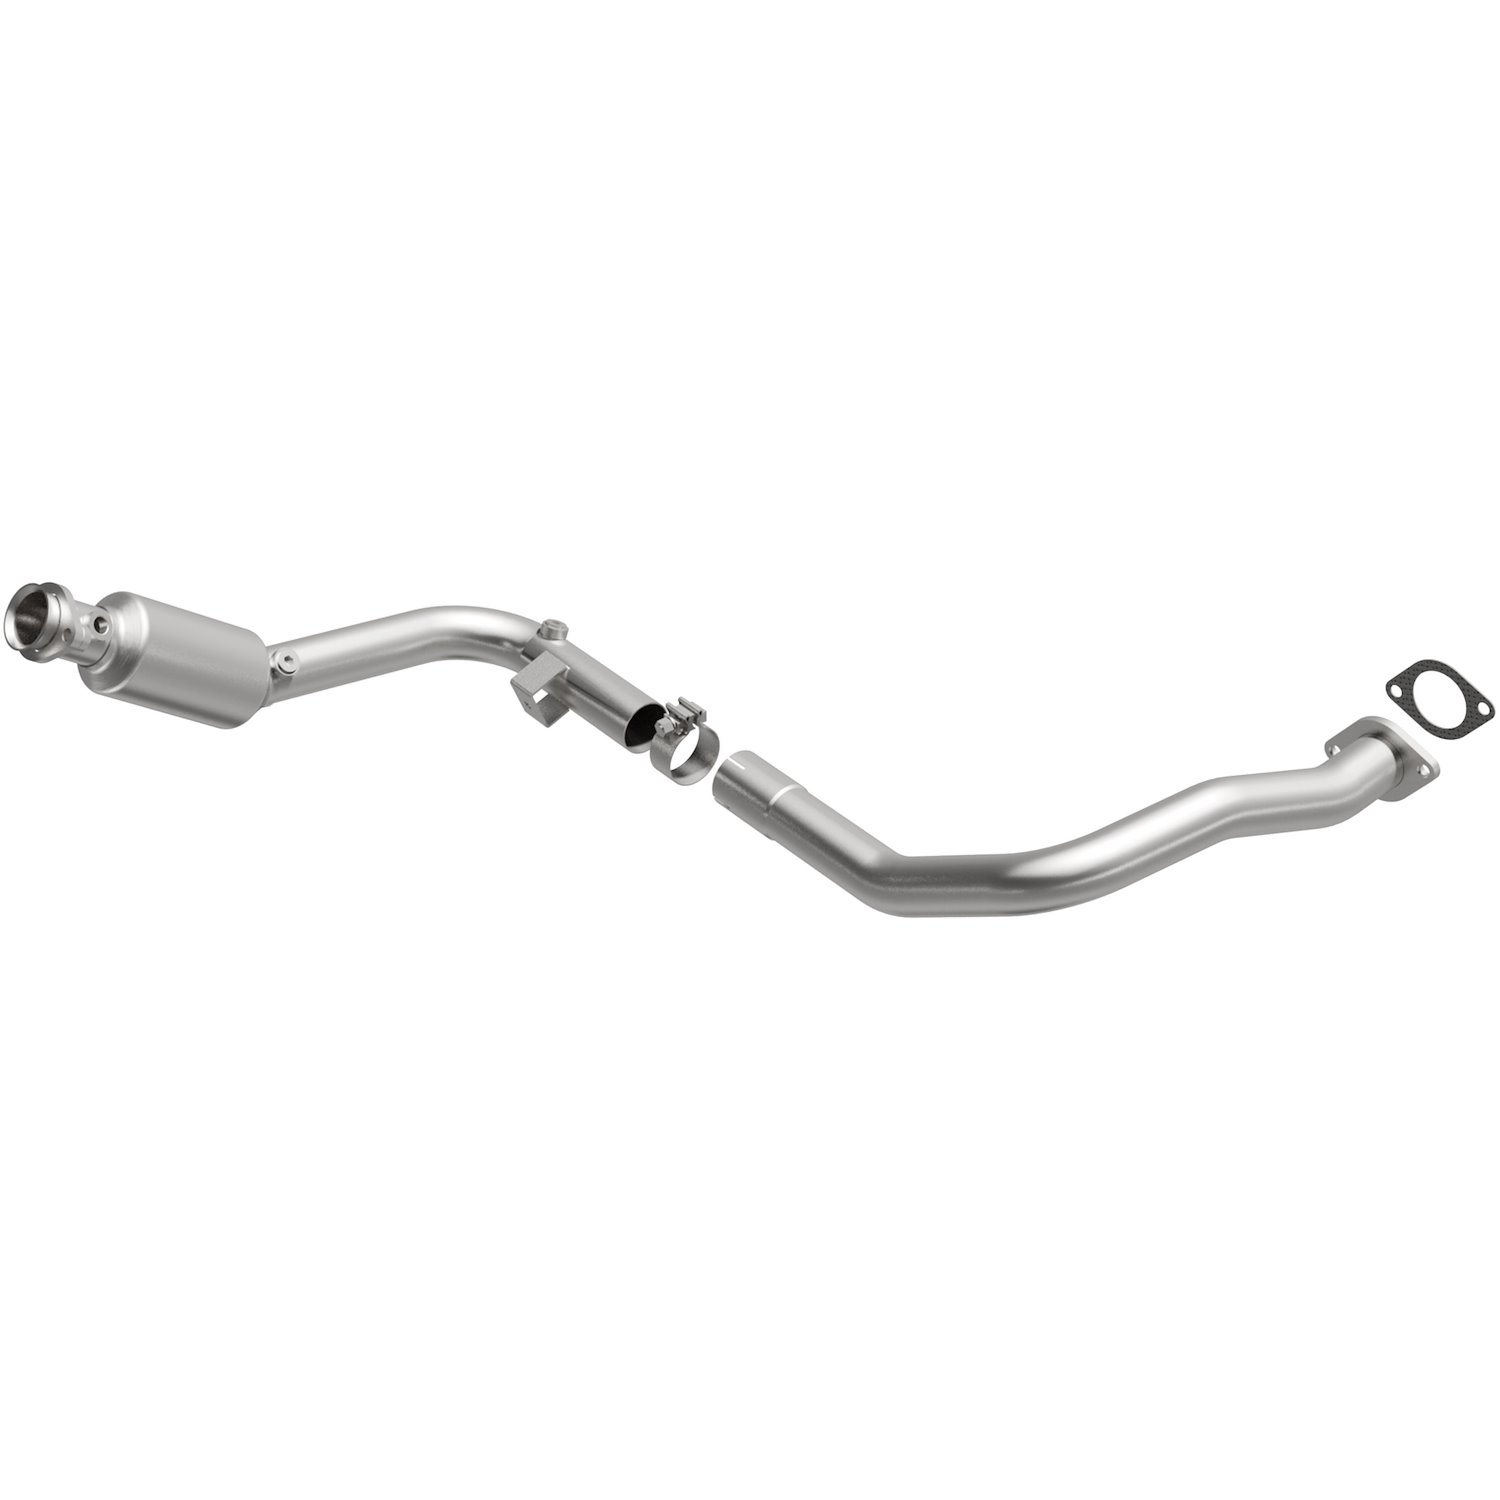 2007-2009 Land Rover Range Rover Sport California Grade CARB Compliant Direct-Fit Catalytic Converter